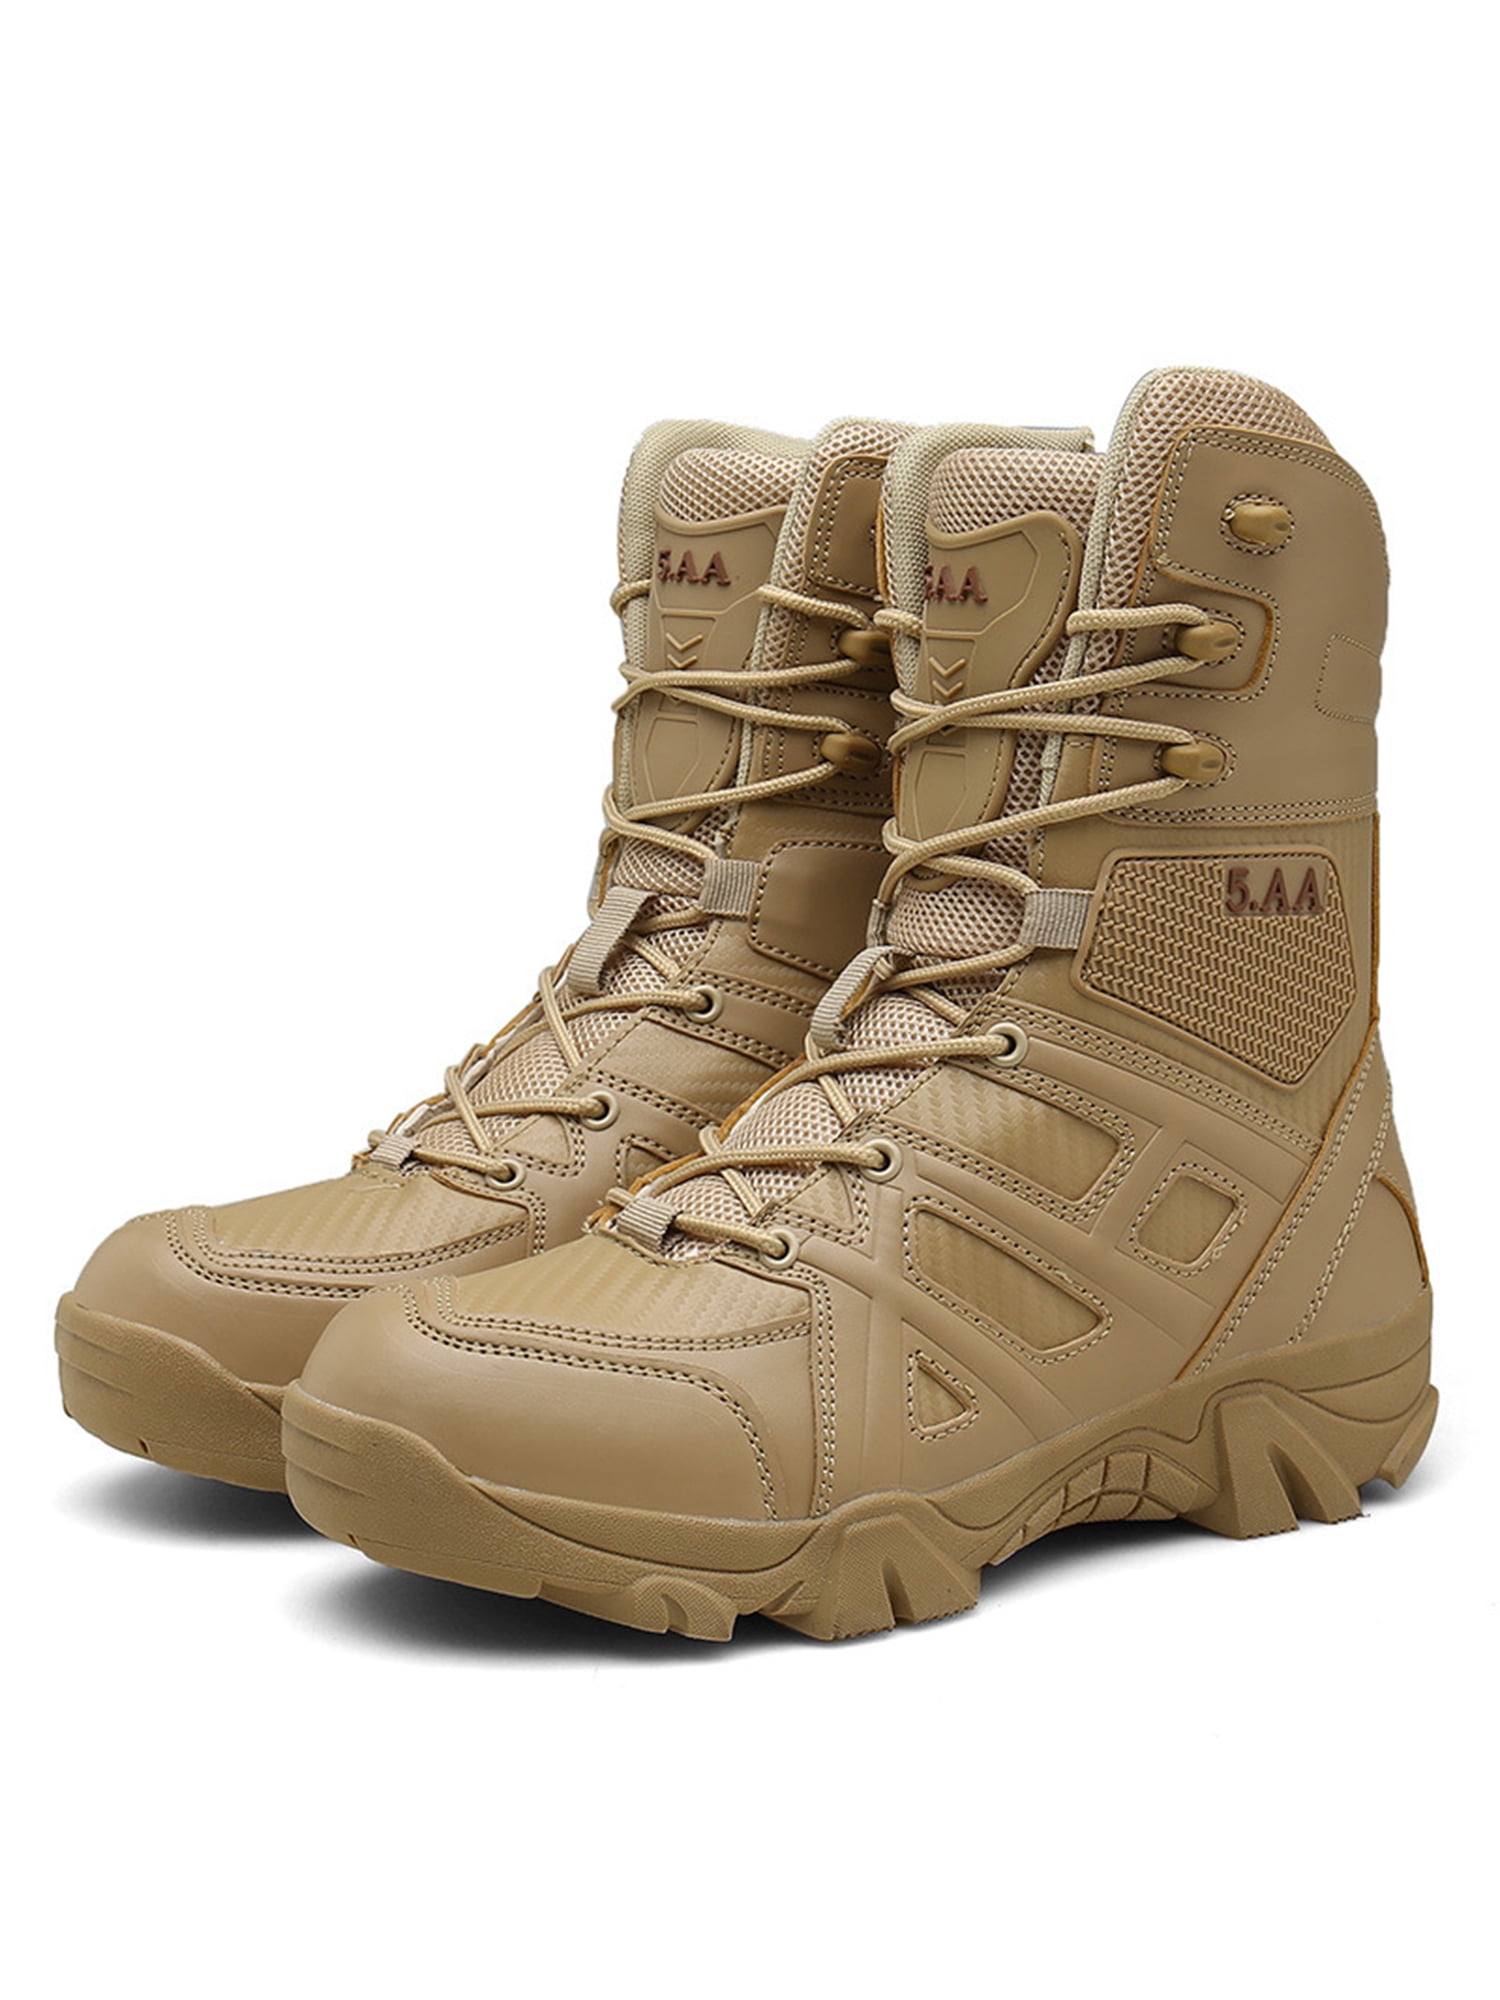 Military Ankle Boots Hiking Outdoor Shoes 9 Men's Tactical Lace Up Desert Combat 